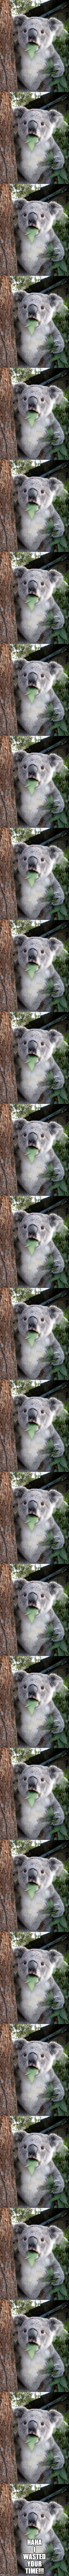 HAHA I WASTED YOUR TIME!!! | image tagged in memes,surprised koala | made w/ Imgflip meme maker